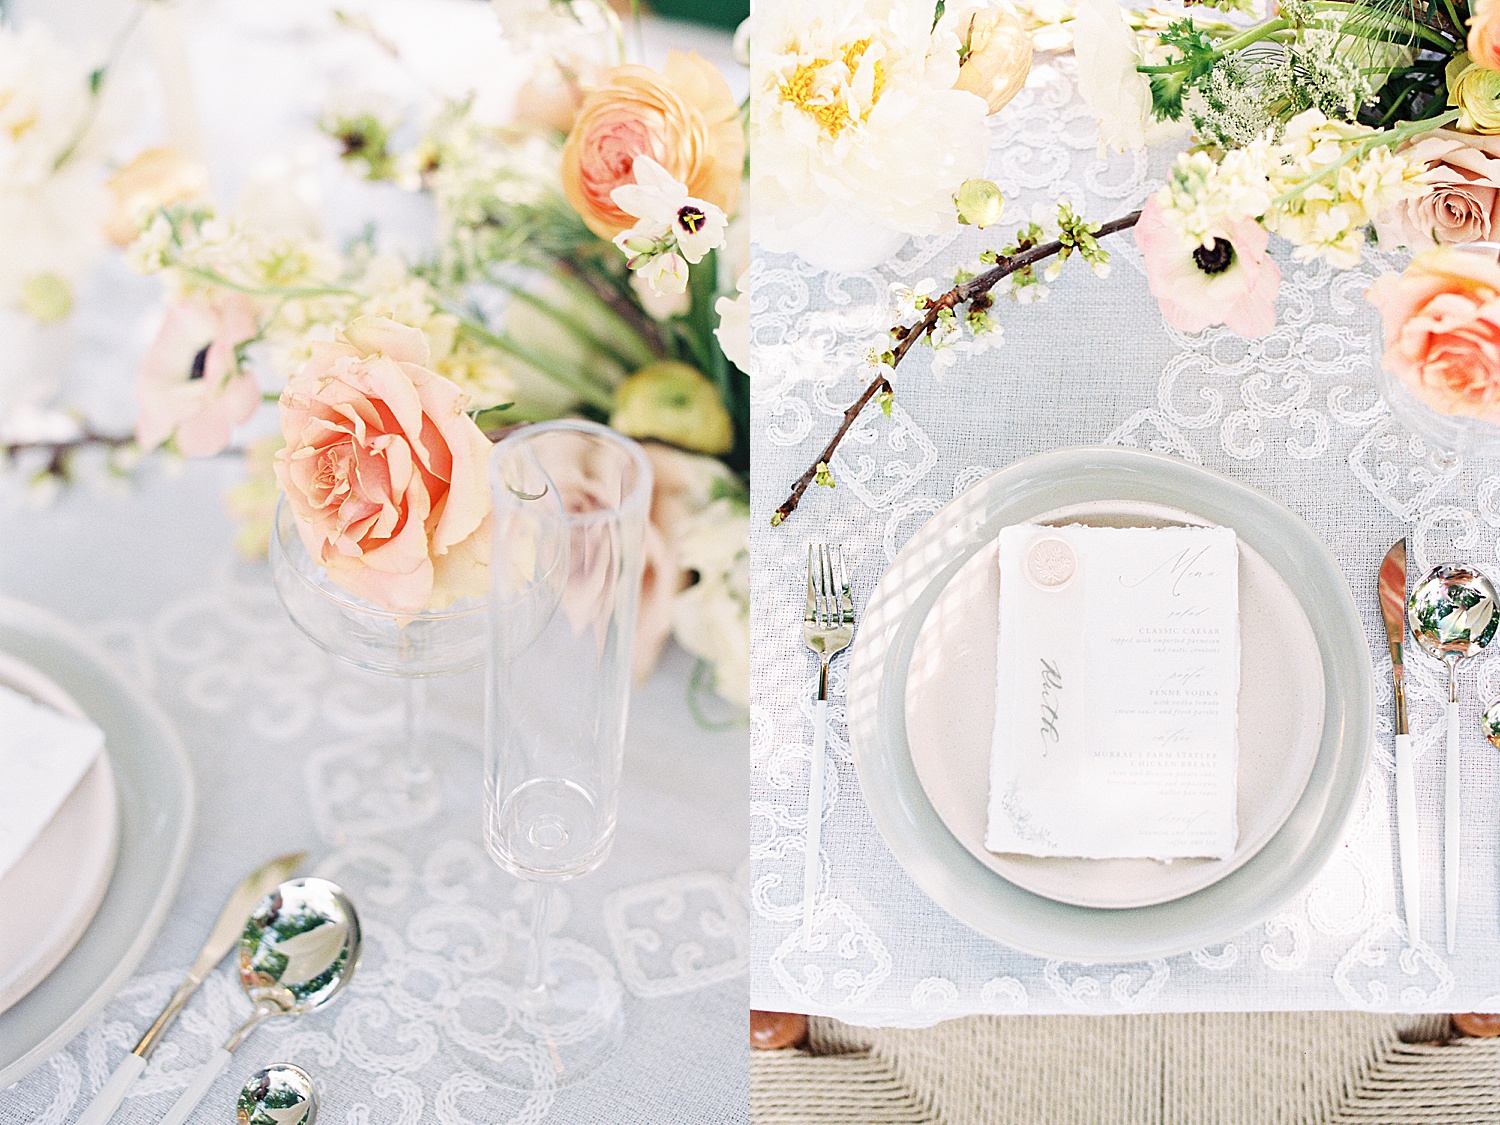 Table settings for spring wedding by New York Photographer